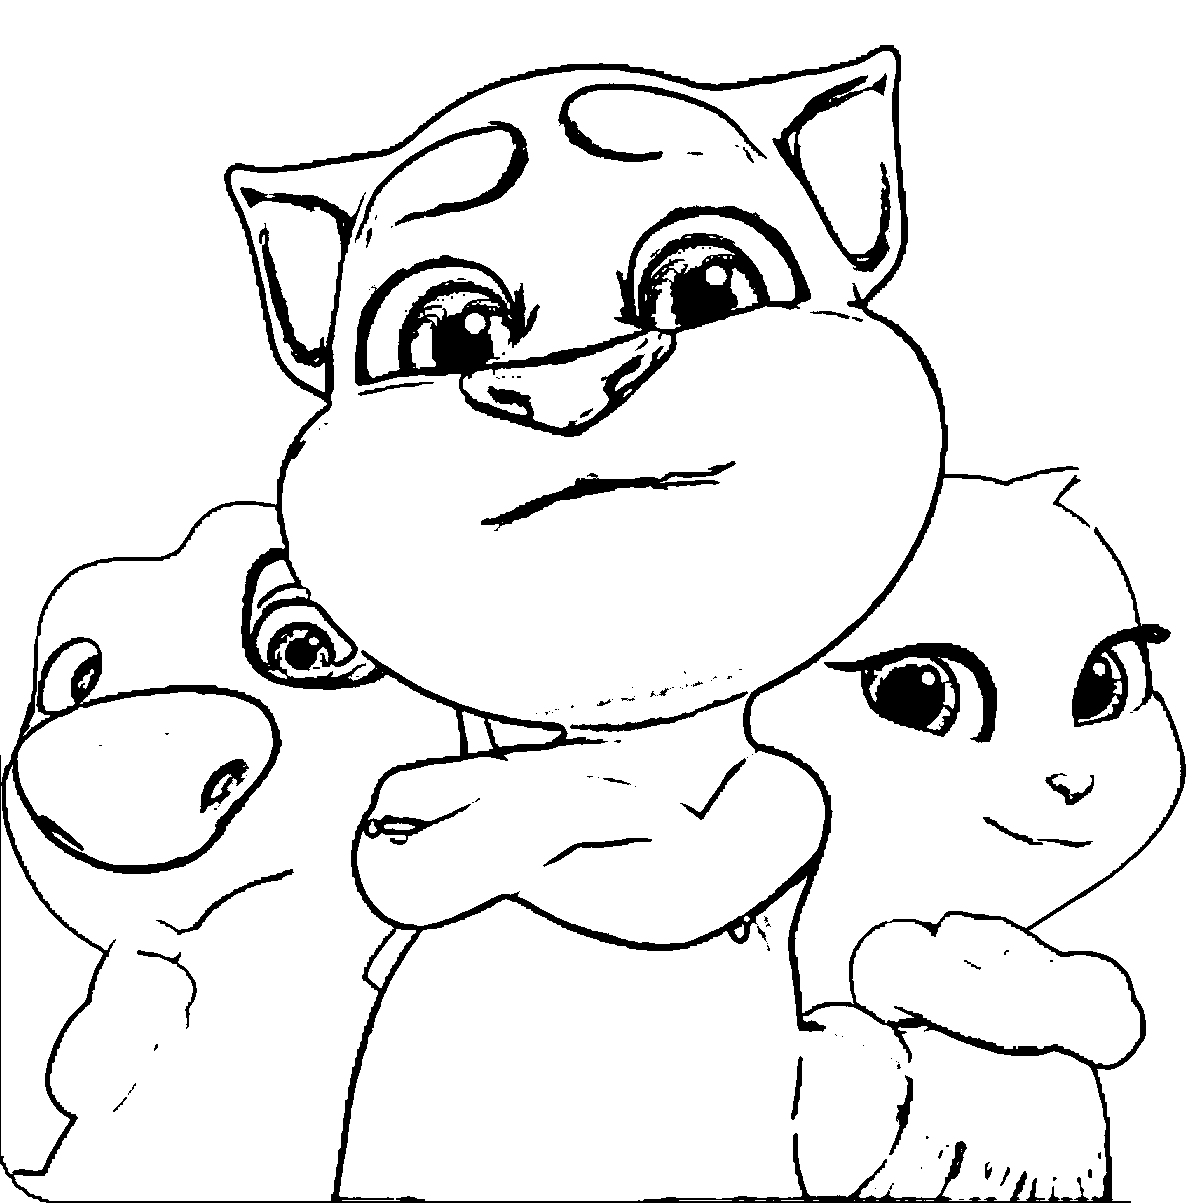 Talking Tom Coloring Pages - Free Printable Coloring Pages for Kids